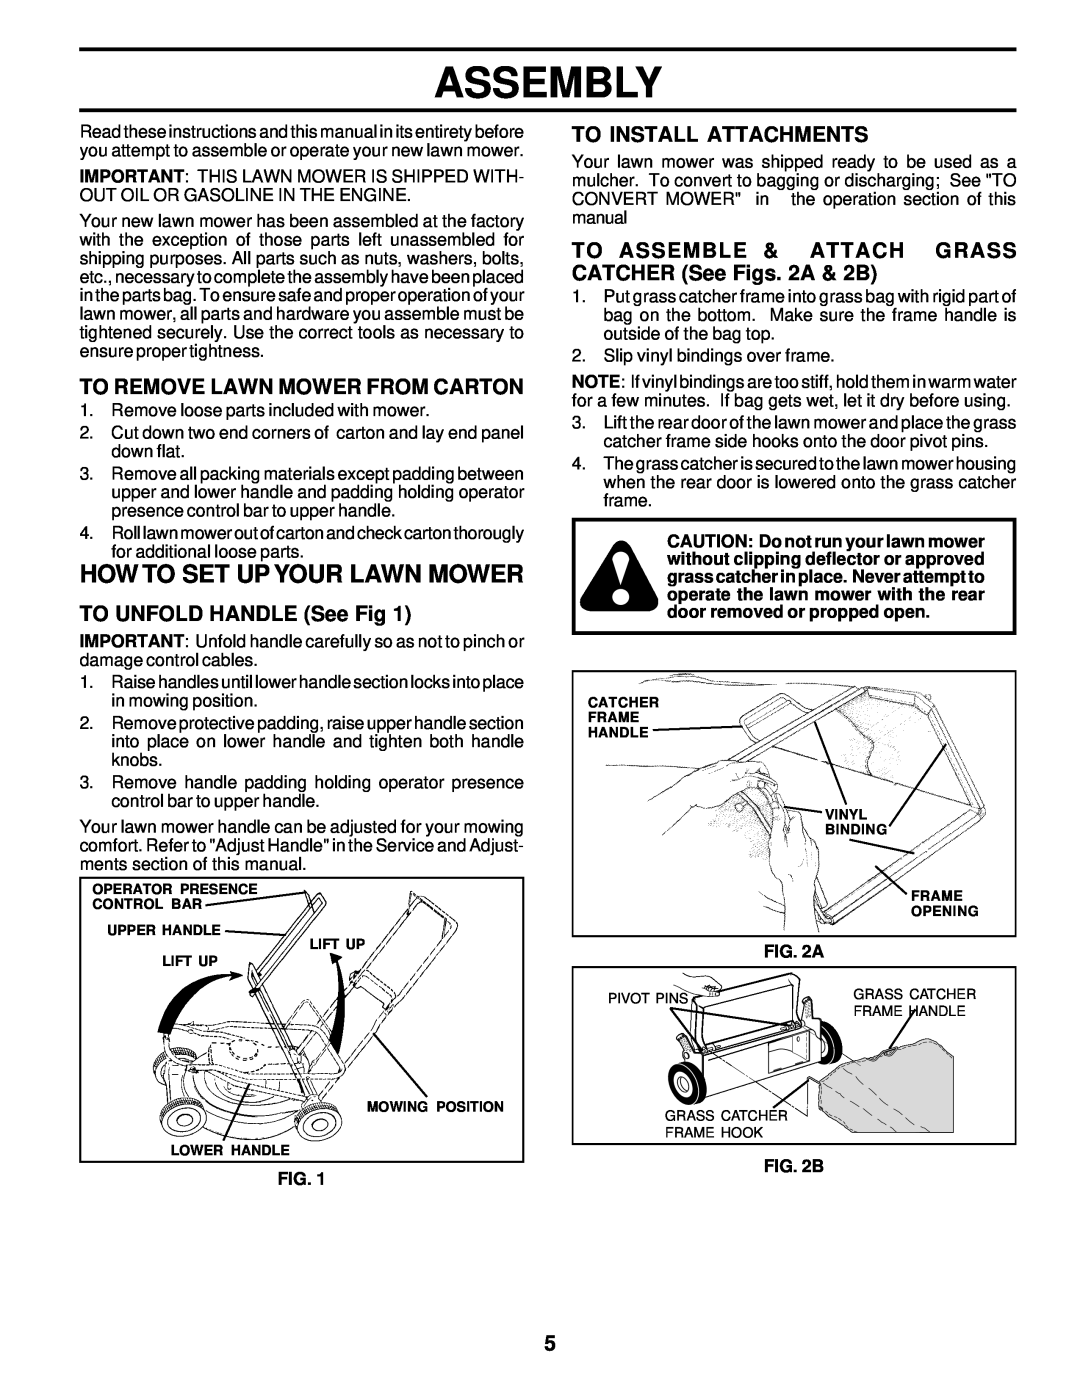 Husqvarna 6022CH Assembly, How To Set Up Your Lawn Mower, To Remove Lawn Mower From Carton, TO UNFOLD HANDLE See Fig, B 